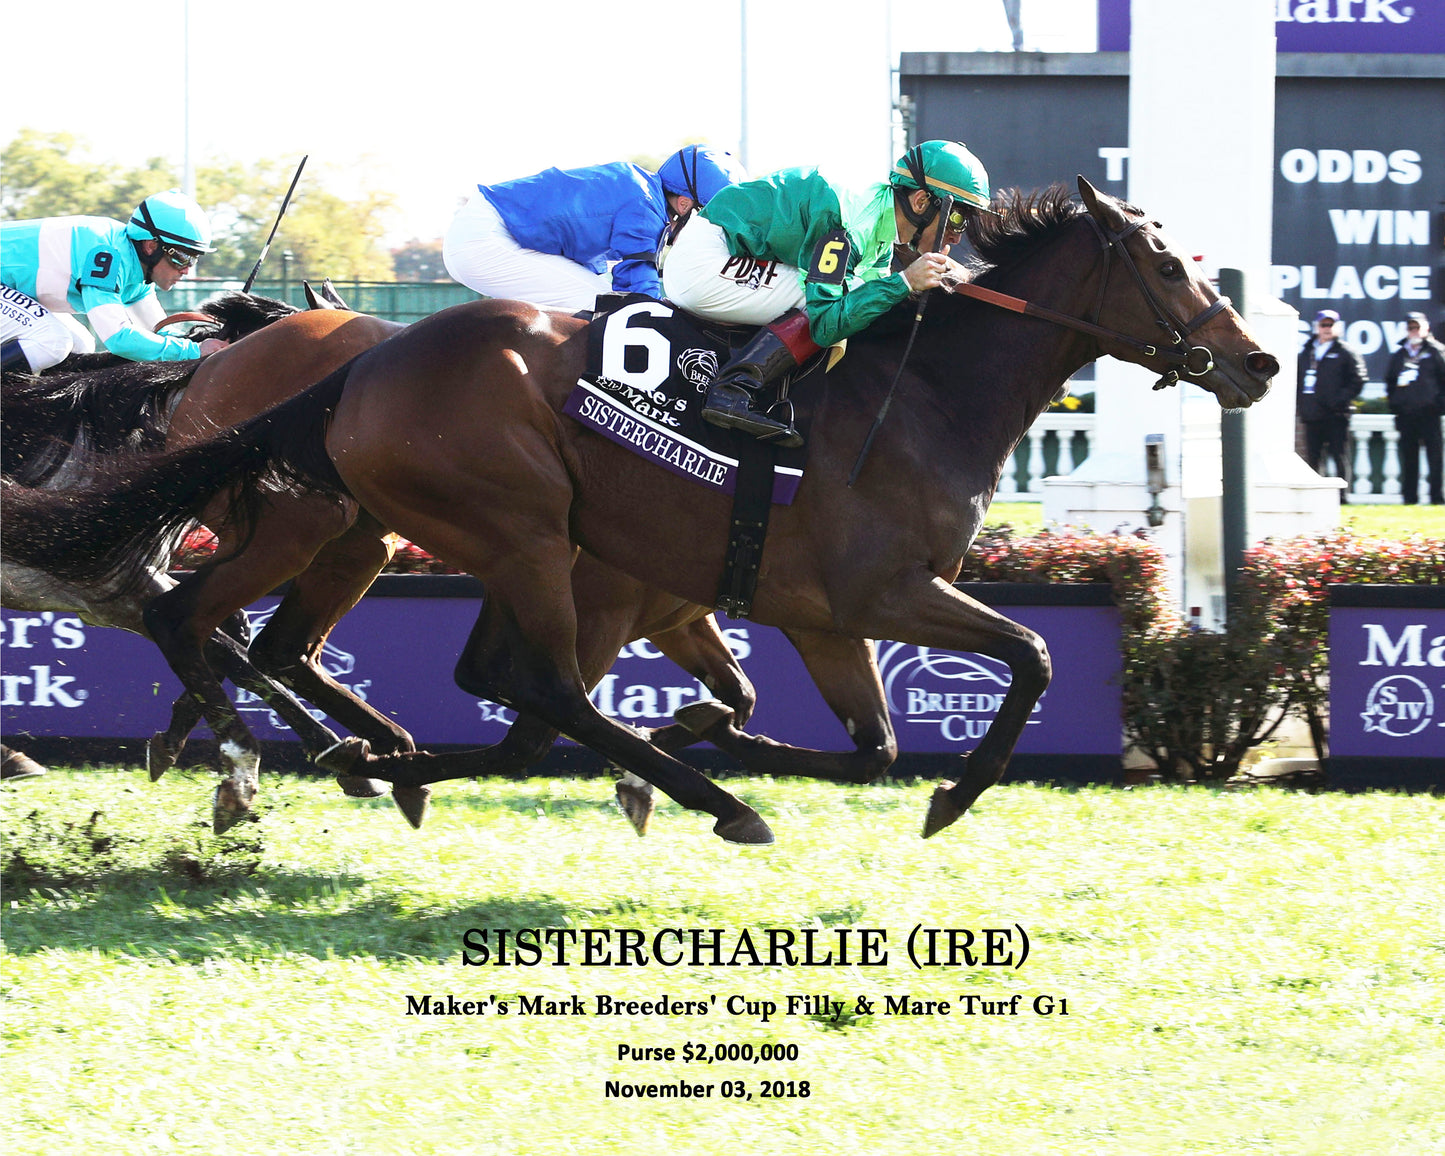 SISTERCHARLIE (IRE) - Maker's Mark Breeders' Cup Filly & Mare Turf G1 - 11-03-18 - R06 - CD - Finish 01 W Ident